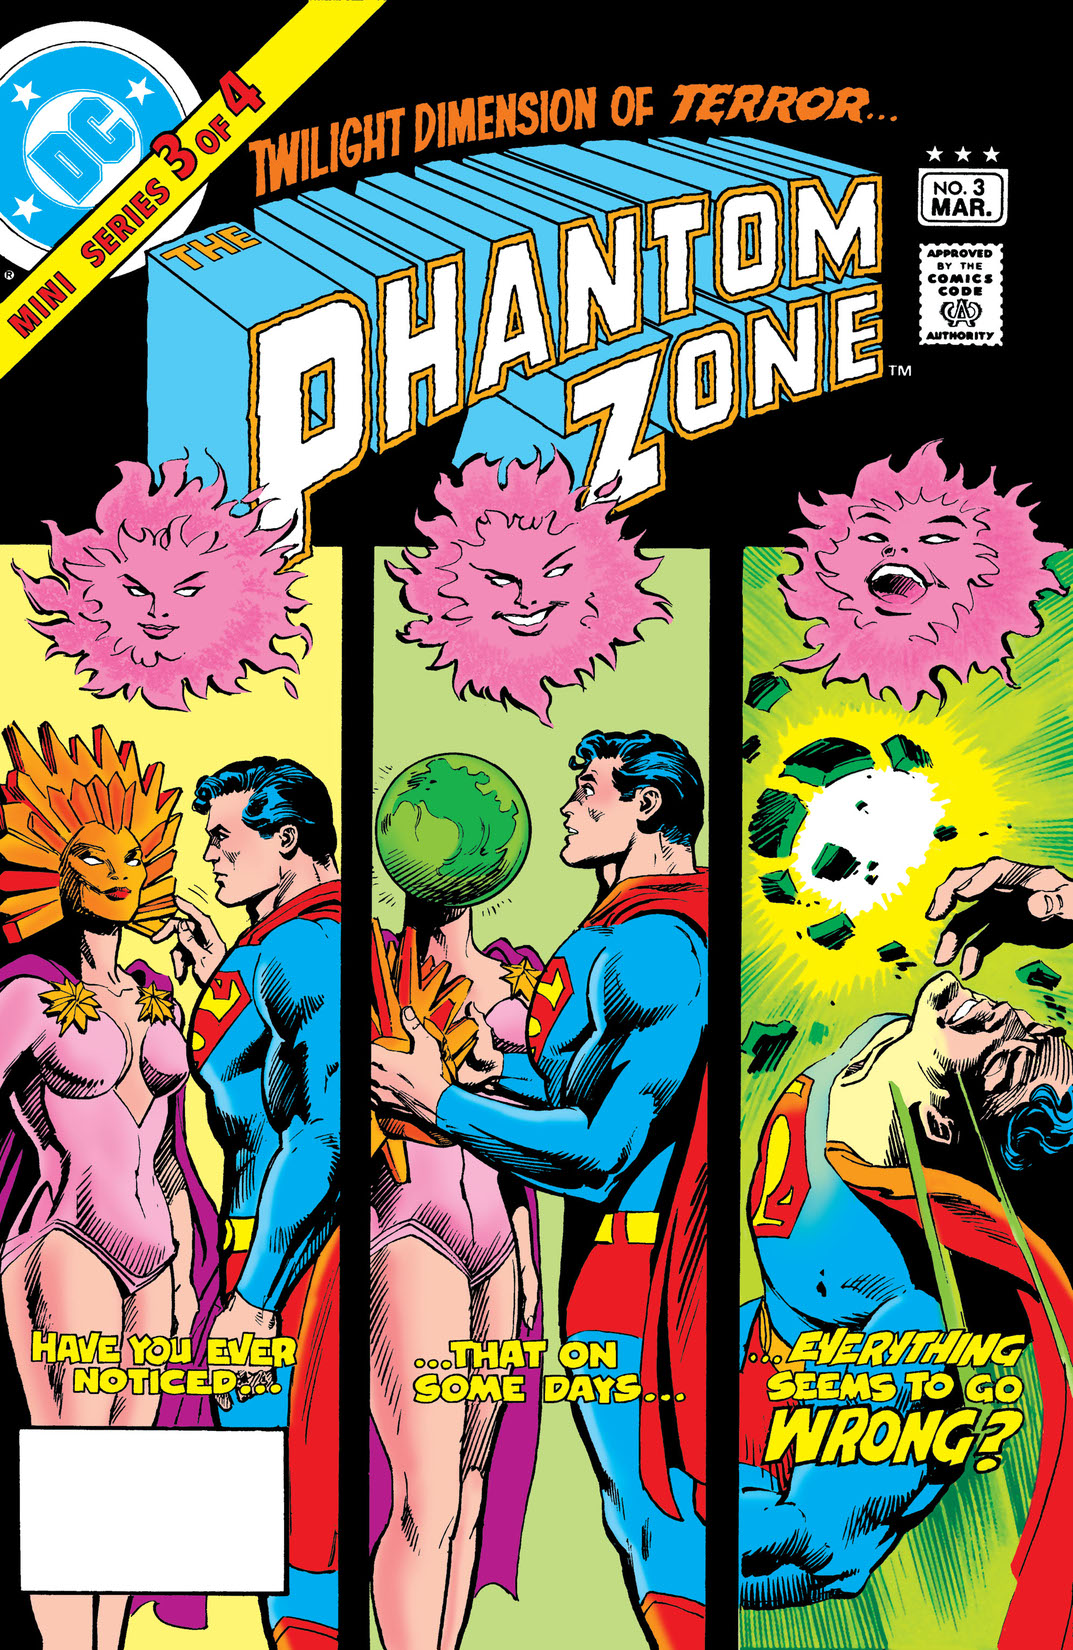 Superman Presents The Phantom Zone #3 preview images